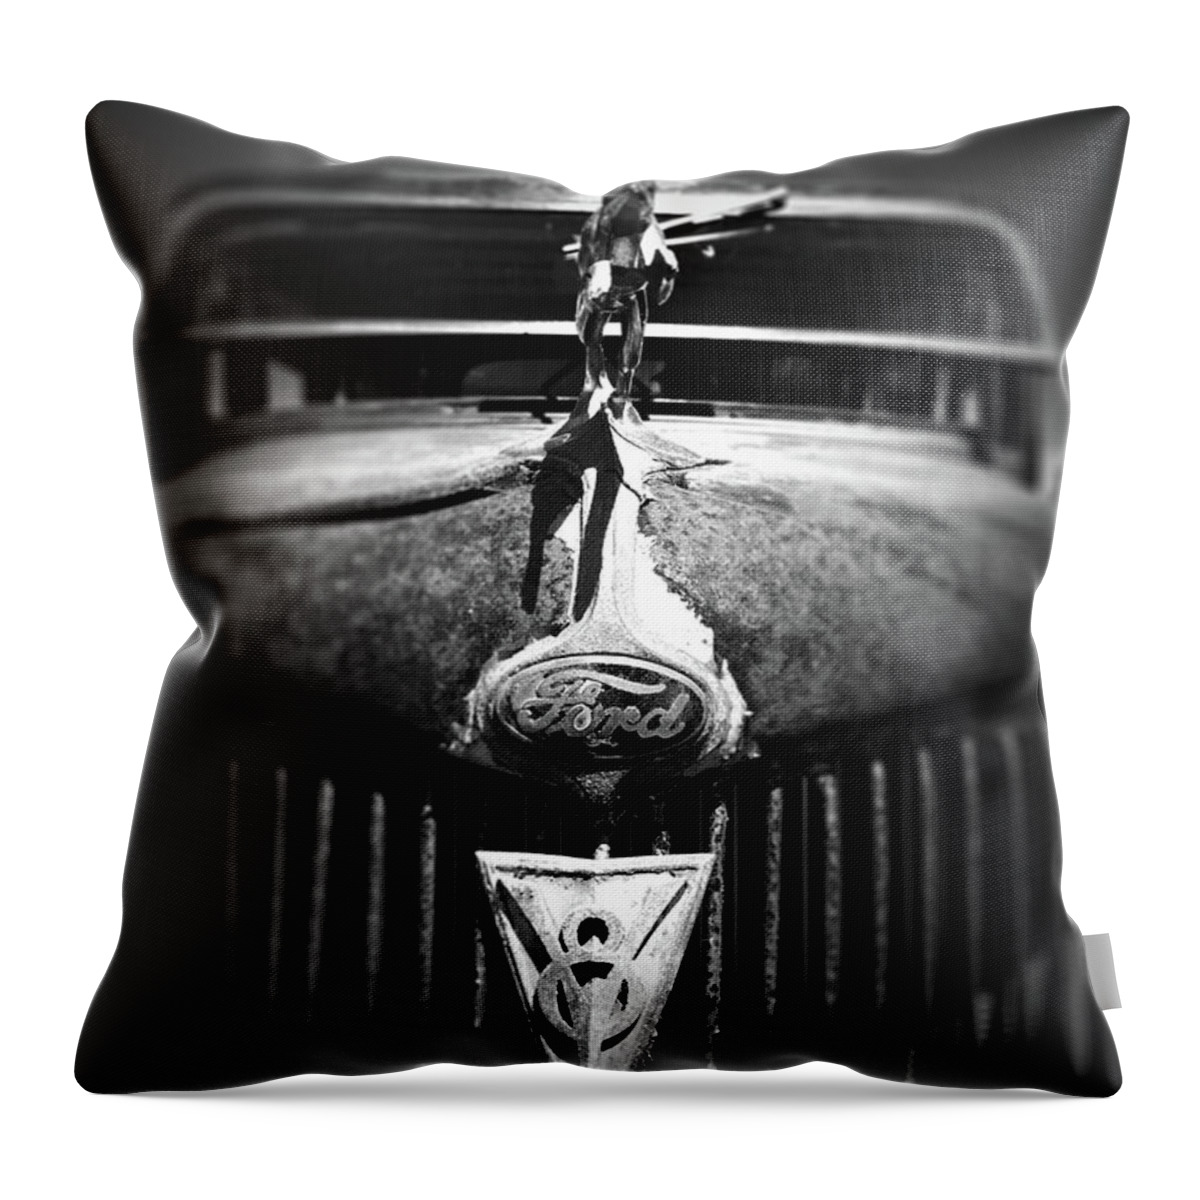 Kelly Hazel Throw Pillow featuring the photograph Ford V8 Grill Teeth by Kelly Hazel